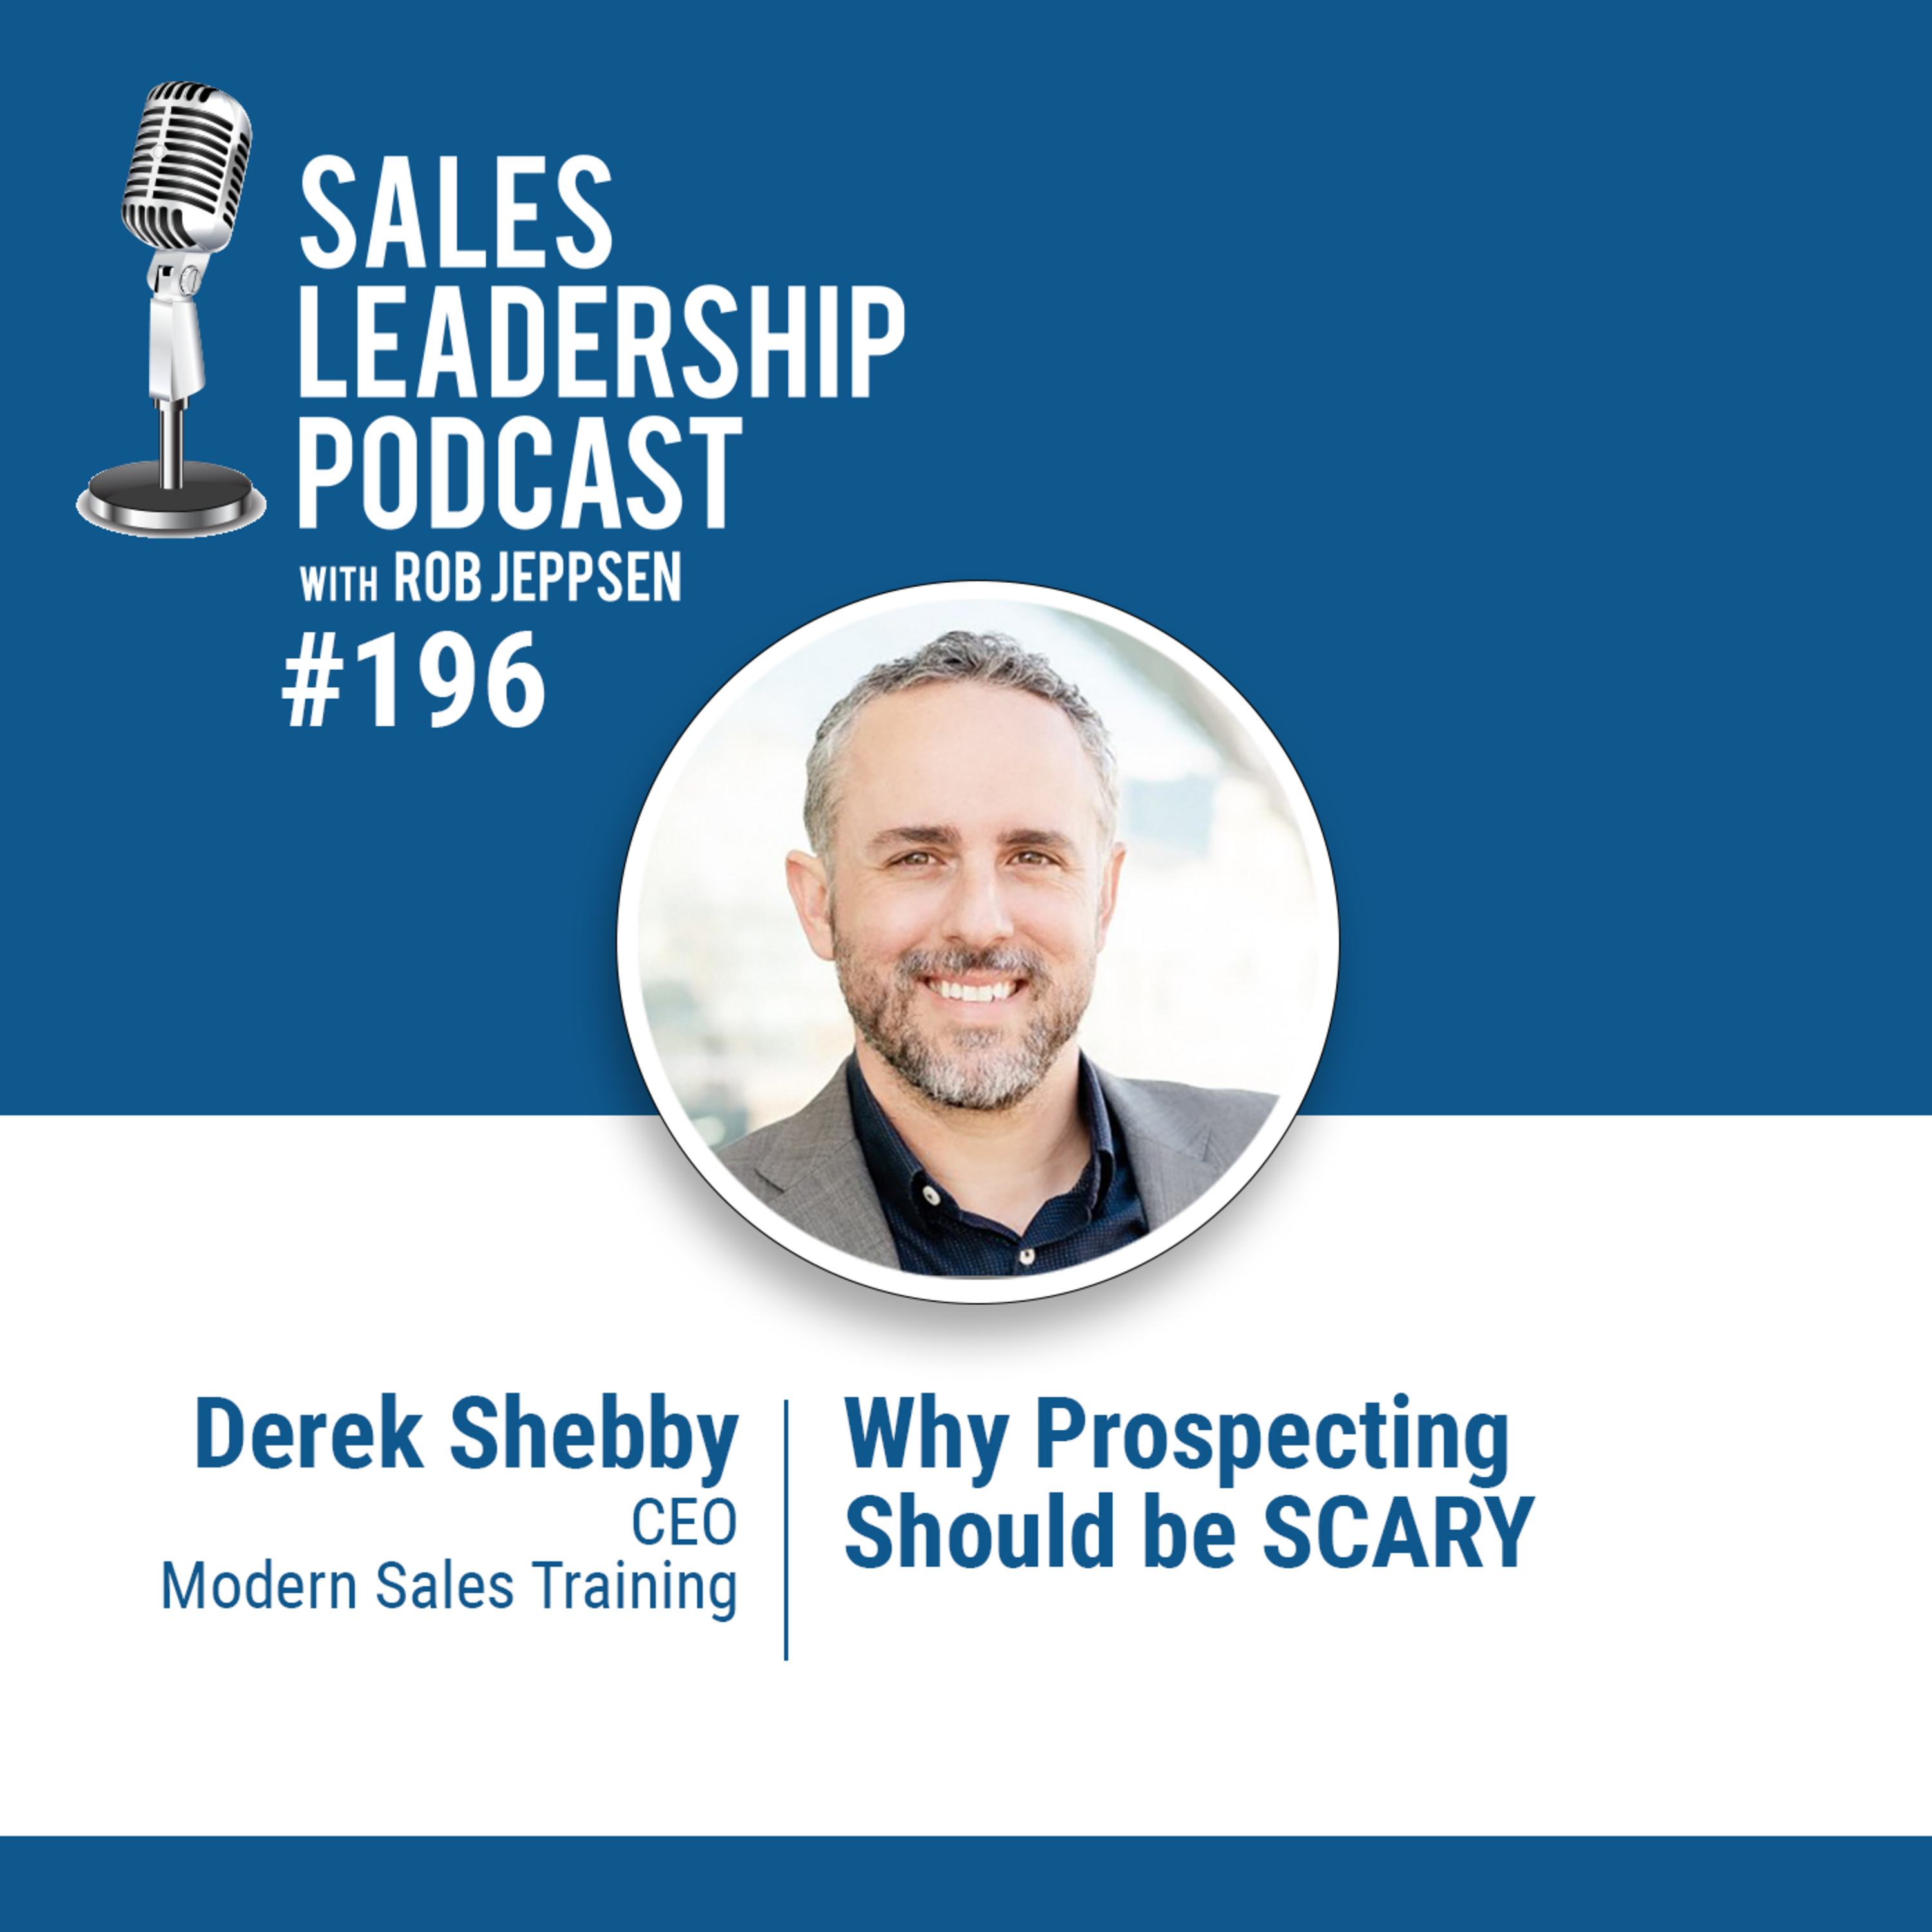 Episode 197: #196: Derek Shebby of Modern Sales Training — Why Prospecting Should be SCARY